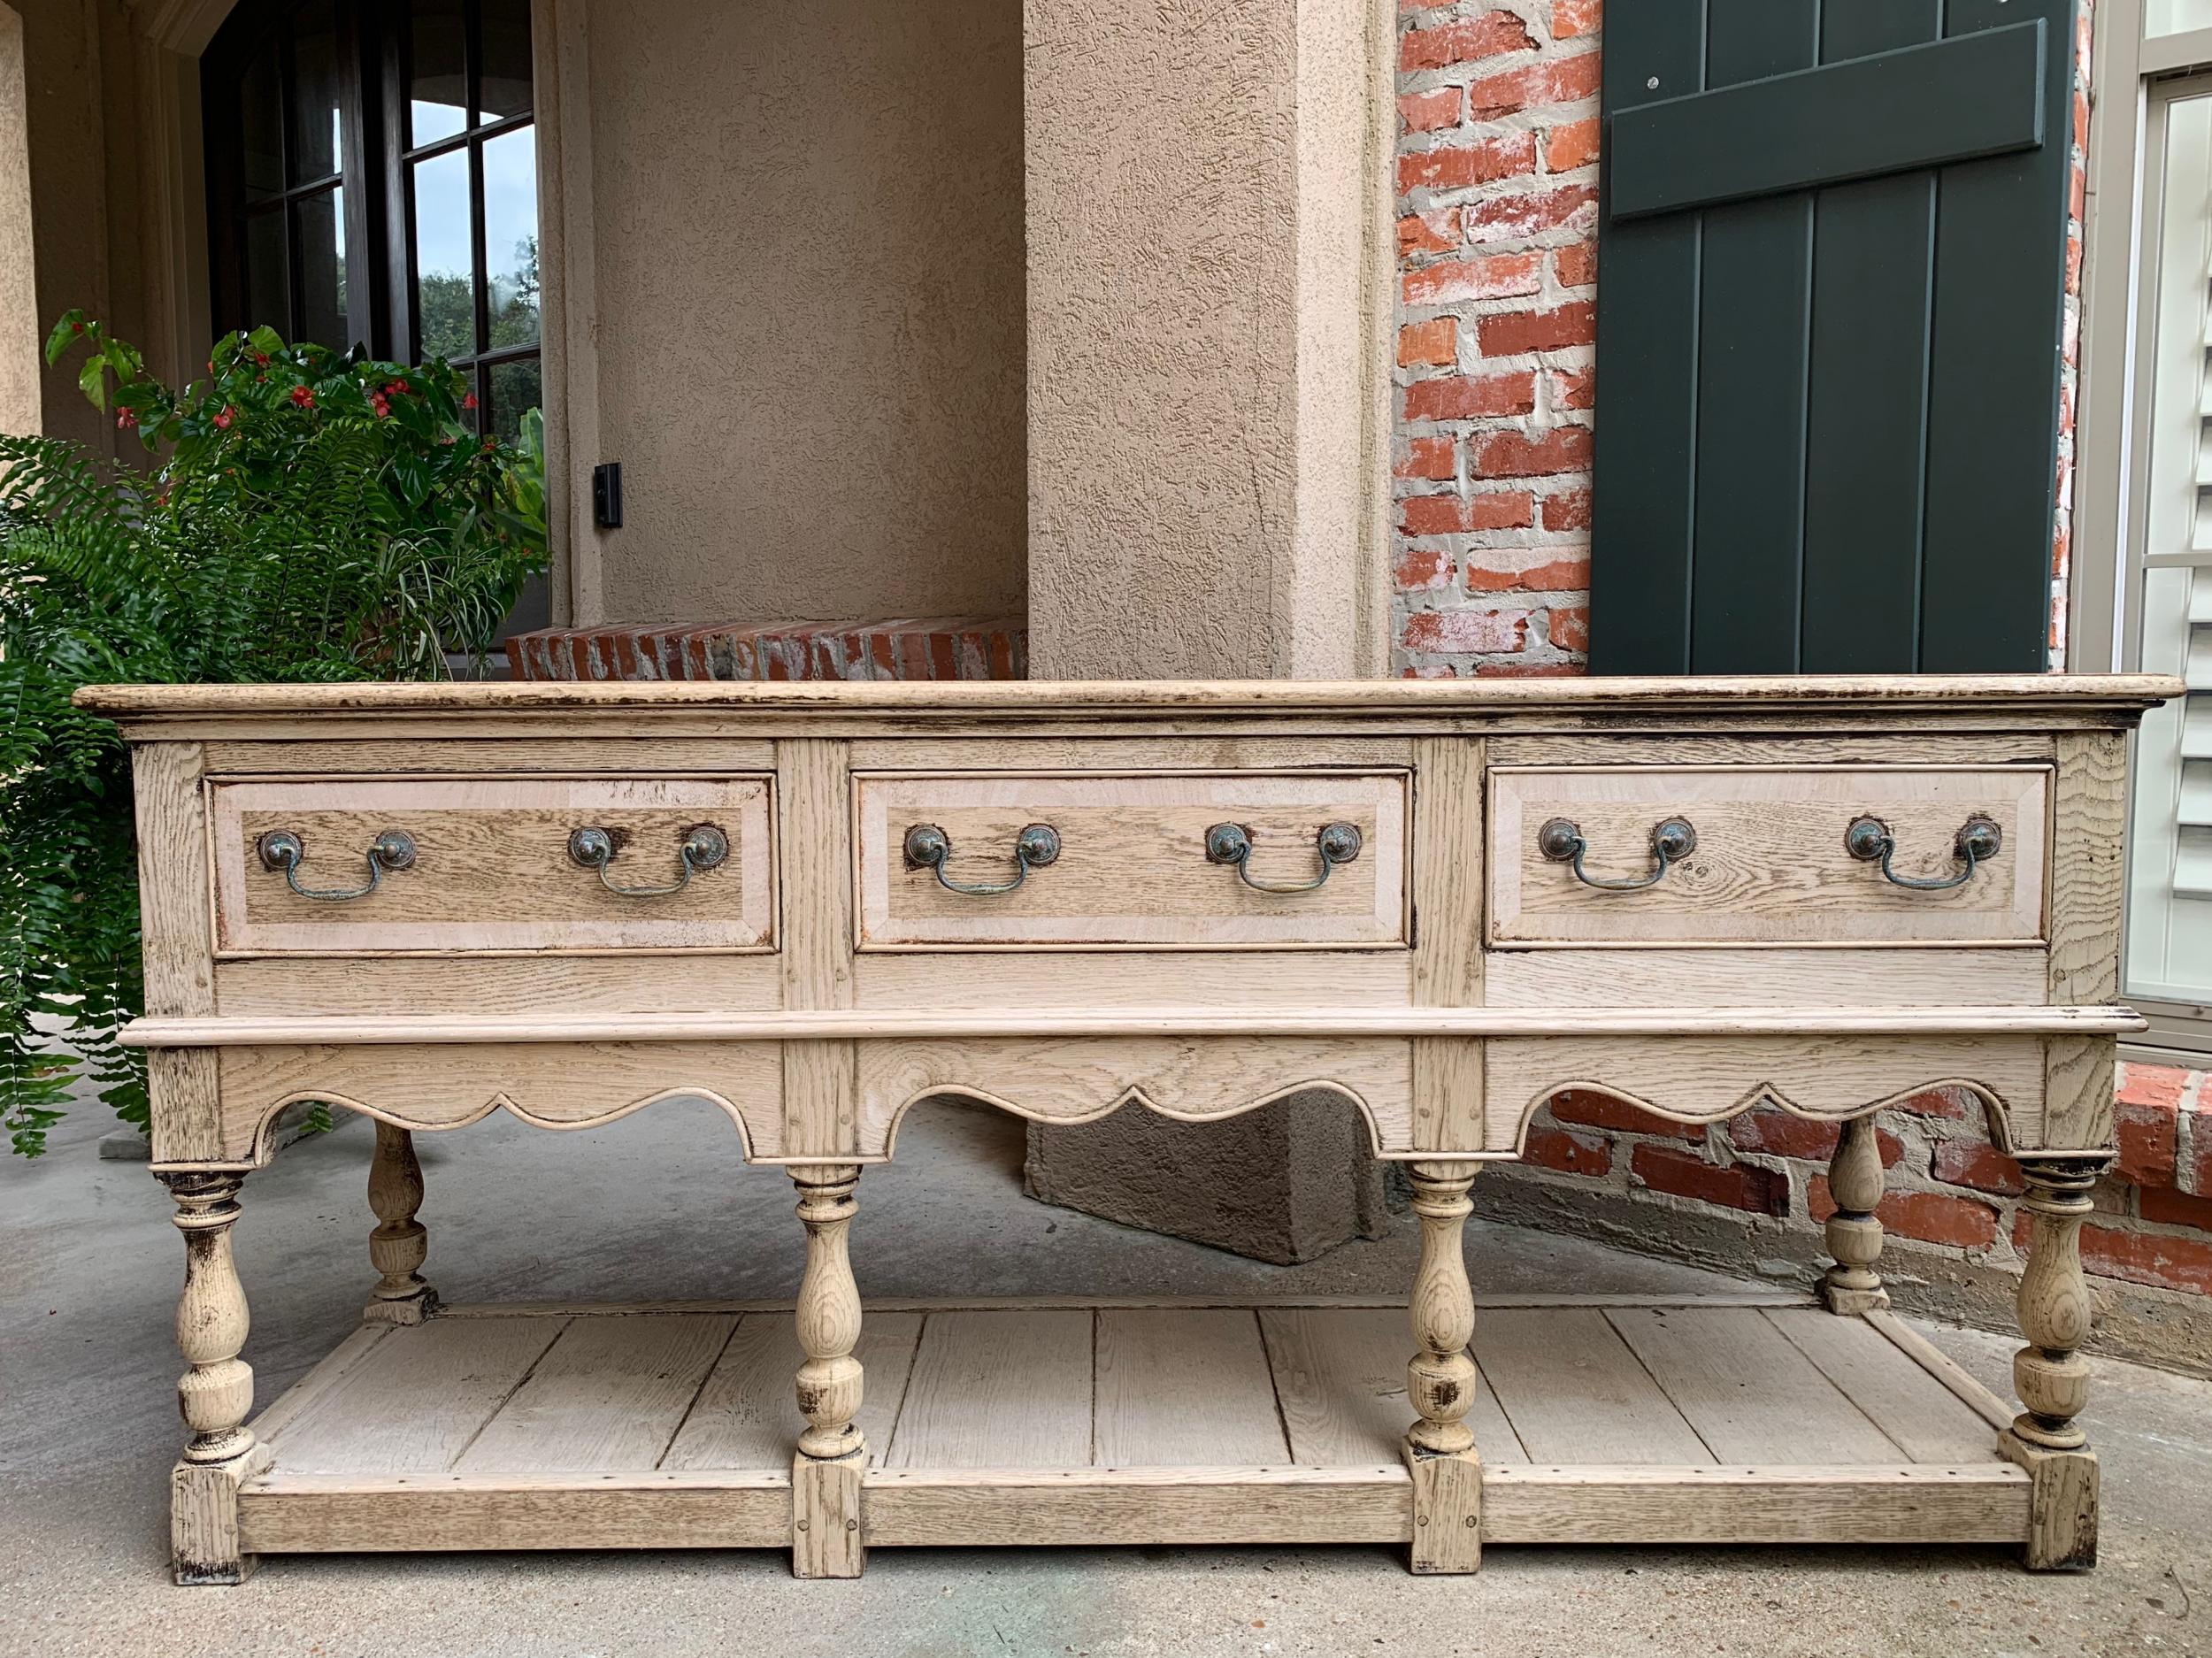 Antique English bleached oak sideboard sofa table 5.5 ft. Farmhouse Credenza

~Direct from England~
~Large, 5.5 ft. antique English sideboard/credenza with traditional British style and beautiful features!~
~Three banded drawers across the